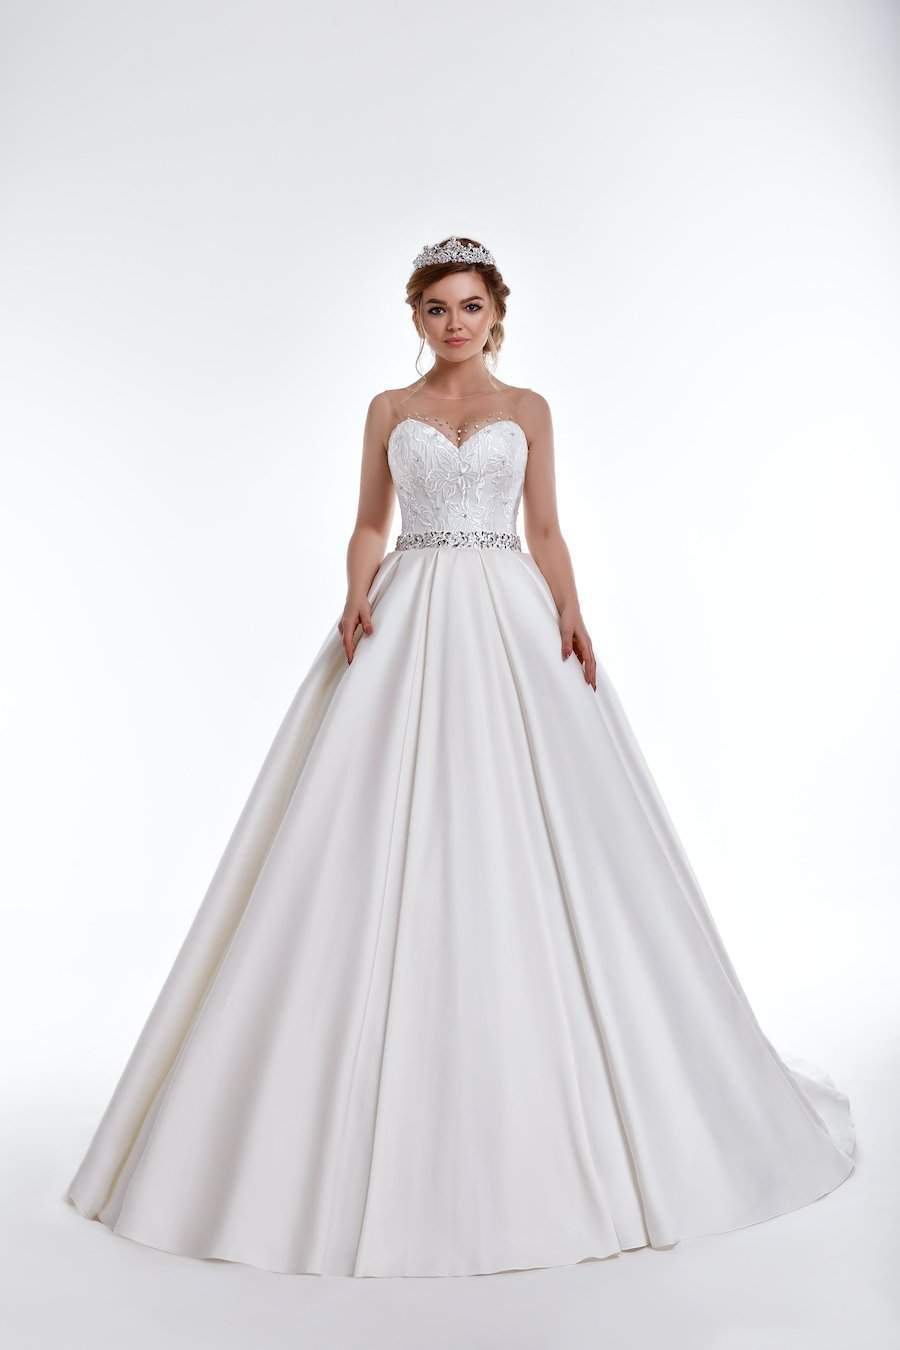 White Ball Gown Wedding Dress-Ball Gown,Classic Elegant Gowns,Royal Wedding Dresses,White